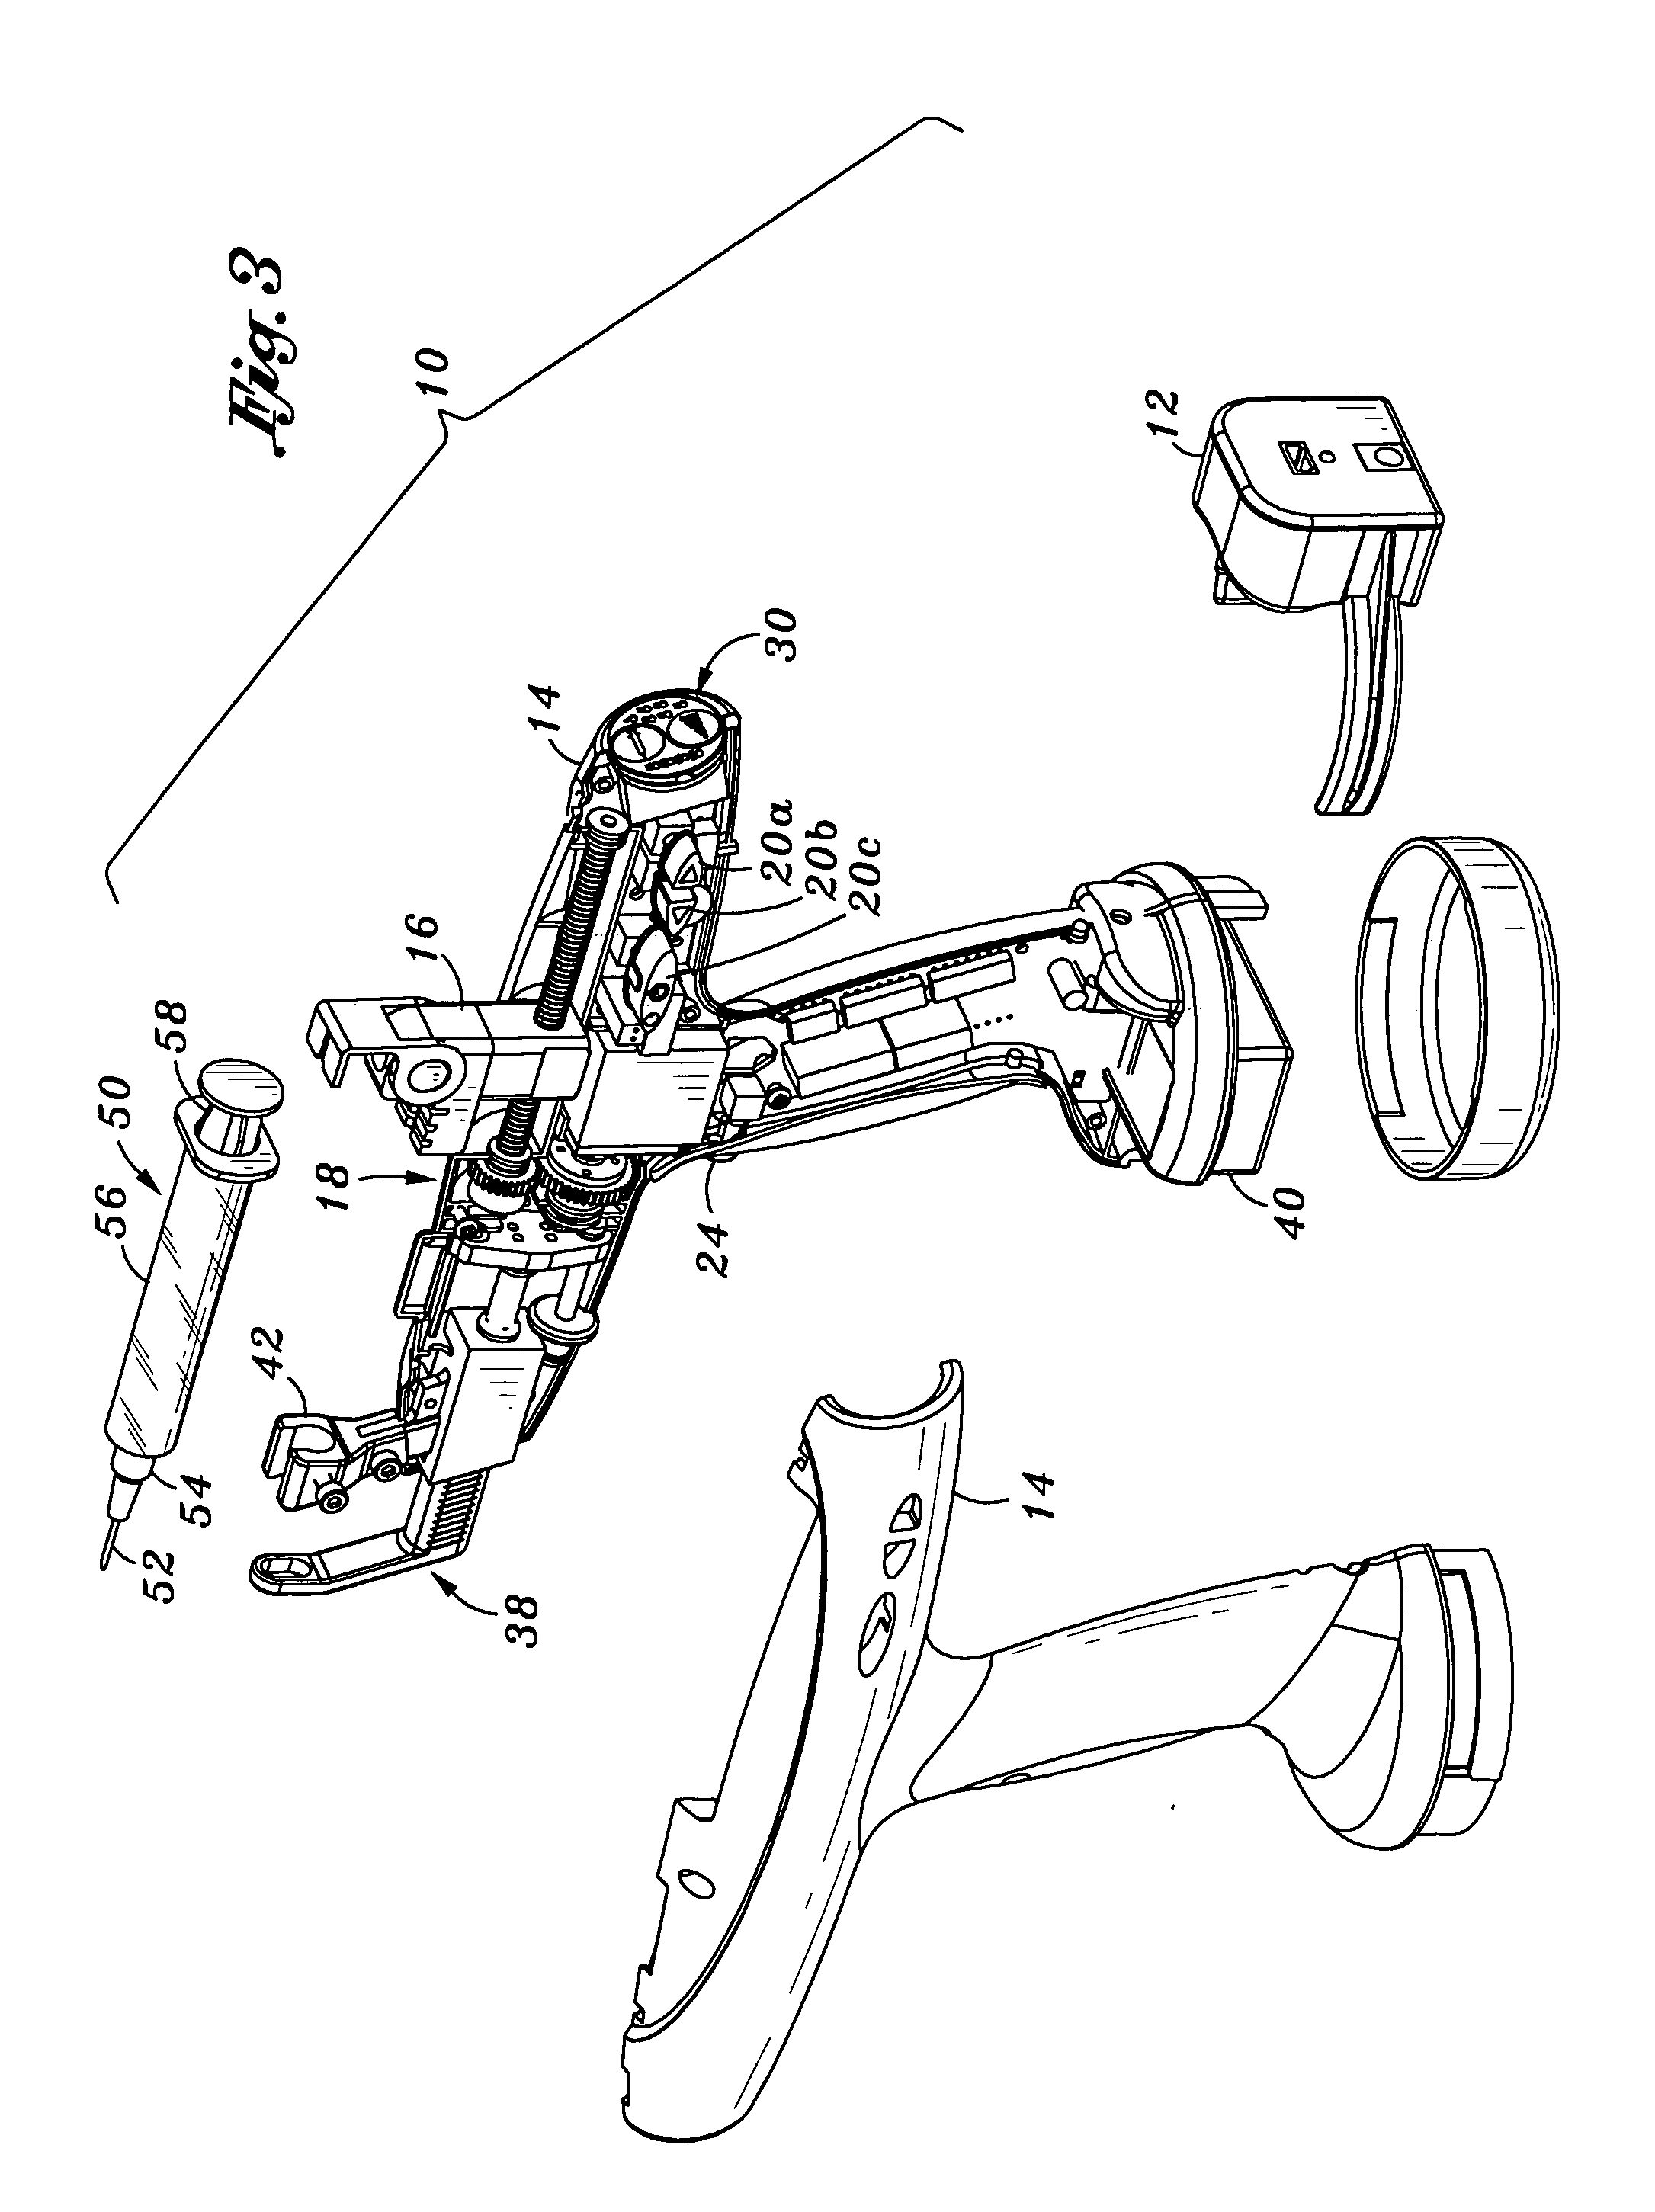 Rechargeable handheld injection device with reversible drive having adjustable syringe cradle